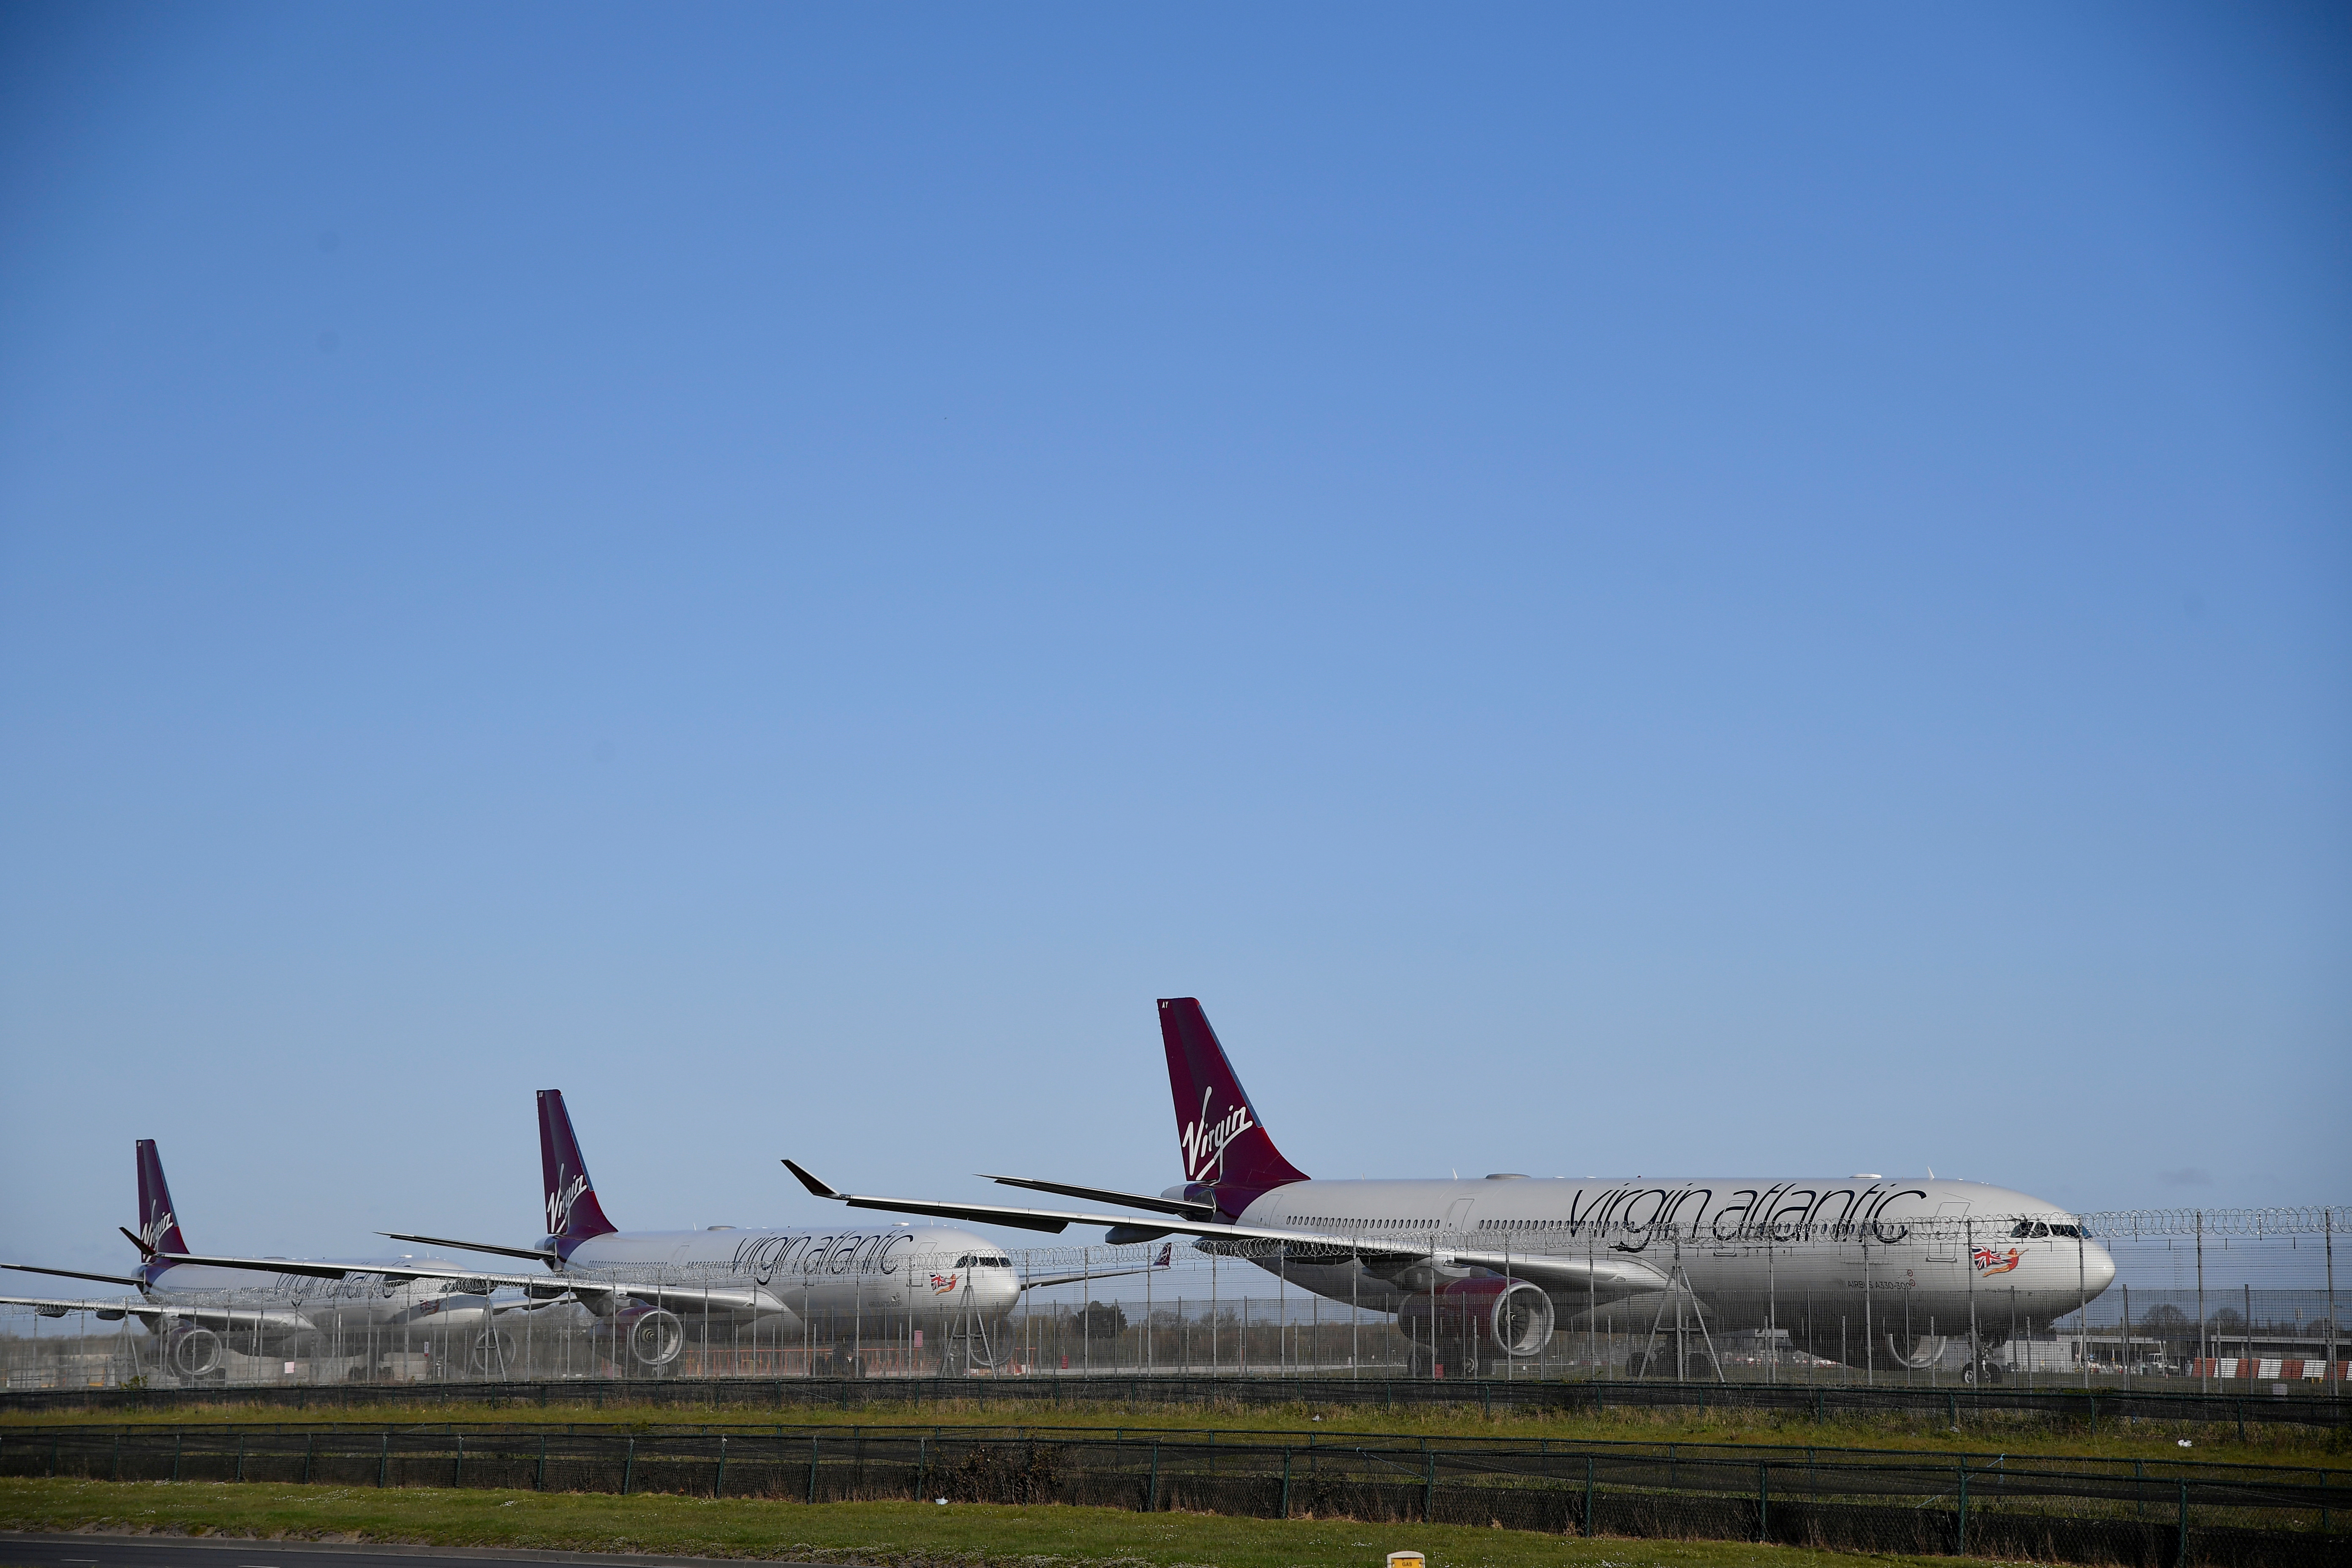 Virgin Atlantic planes are seen at Heathrow airport as the spread of the coronavirus disease (COVID-19) continues, London, Britain, March 31, 2020. REUTERS/Toby Melville/File Photo